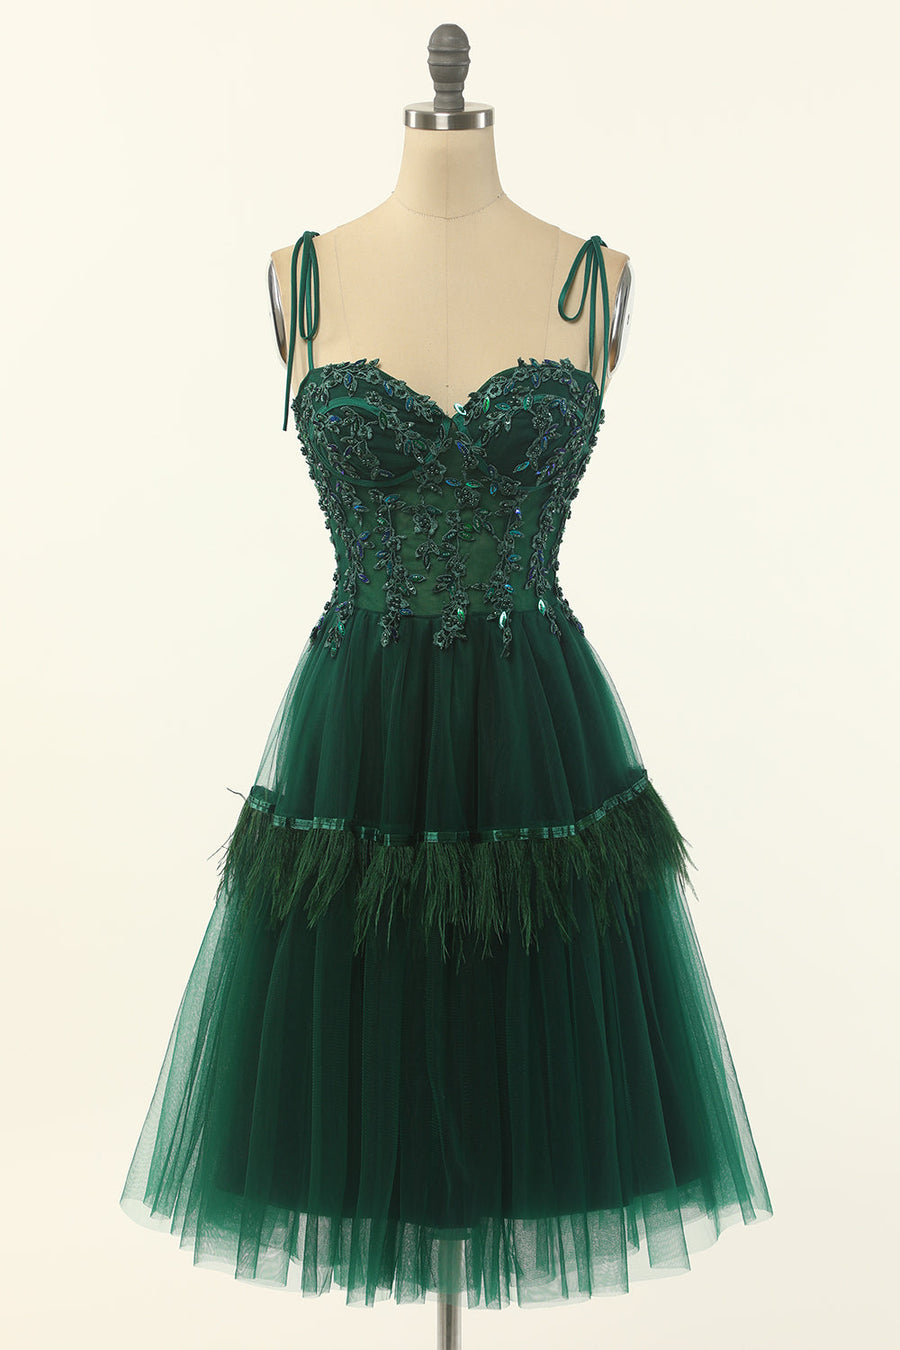 Green Sweetheart Tie-Strap A-Line Short Homecoming Dress